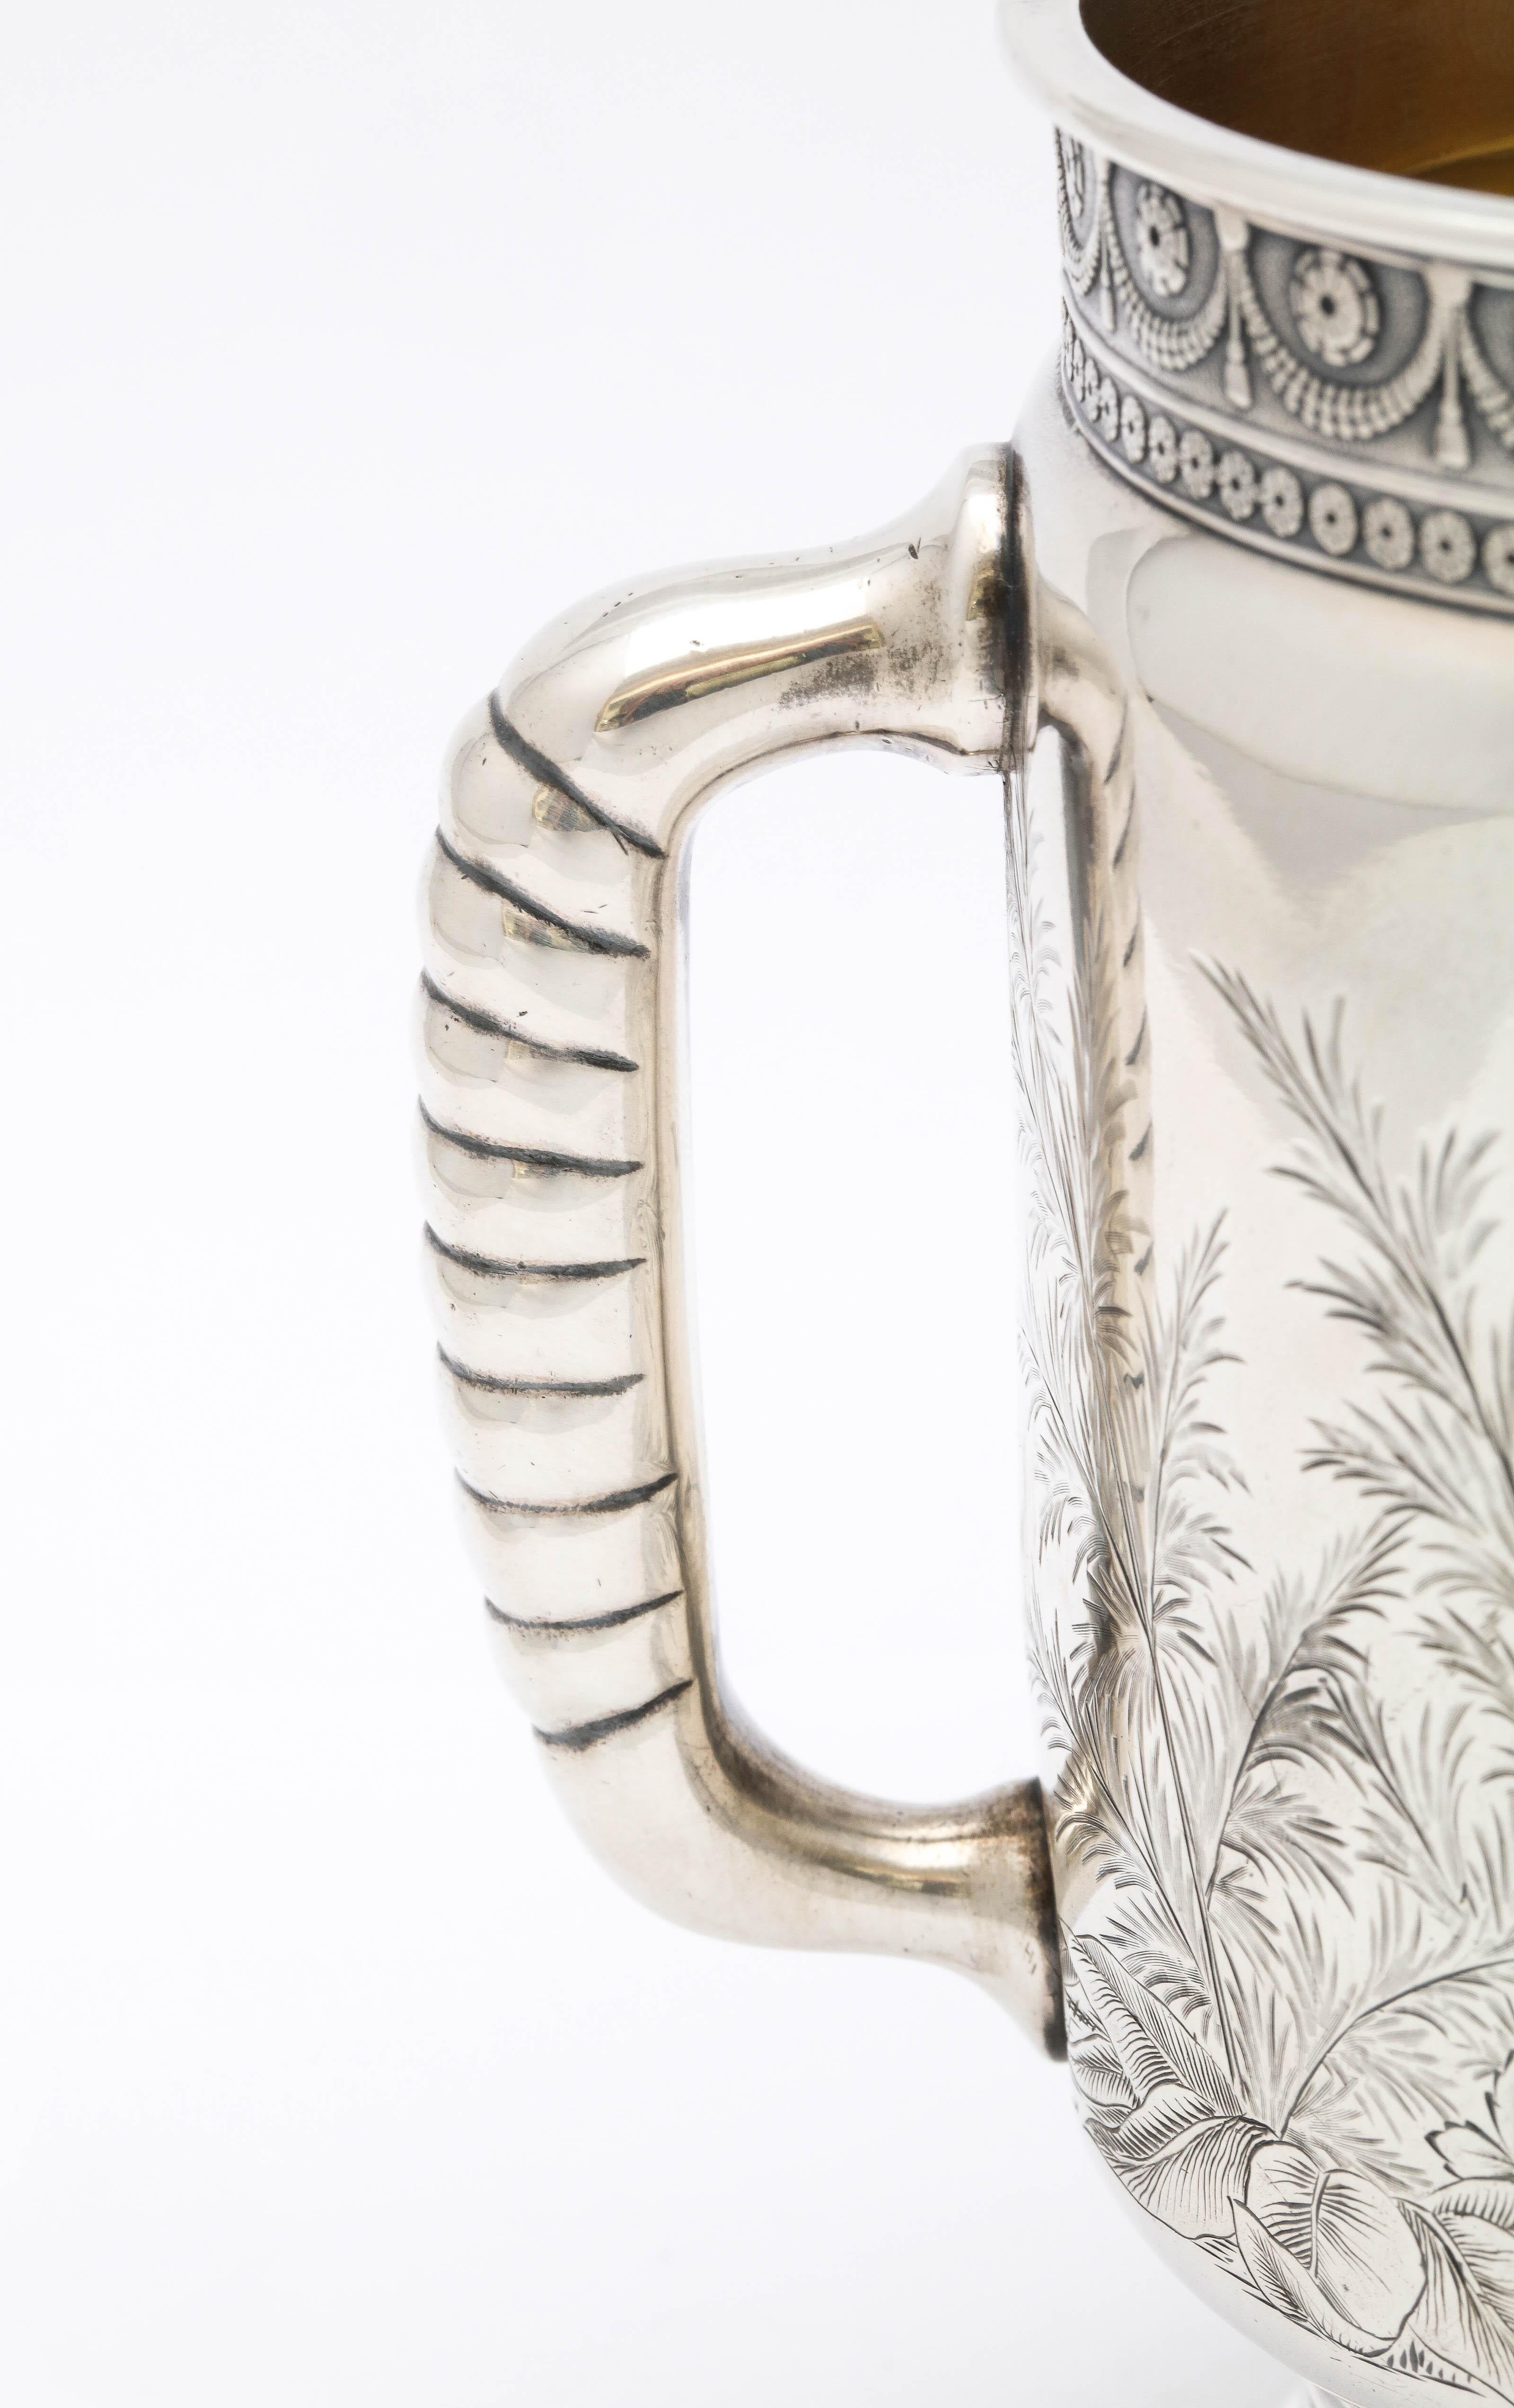 Late 19th Century Sterling Silver Aesthetic Movement Two-Handled Mug by Gorham